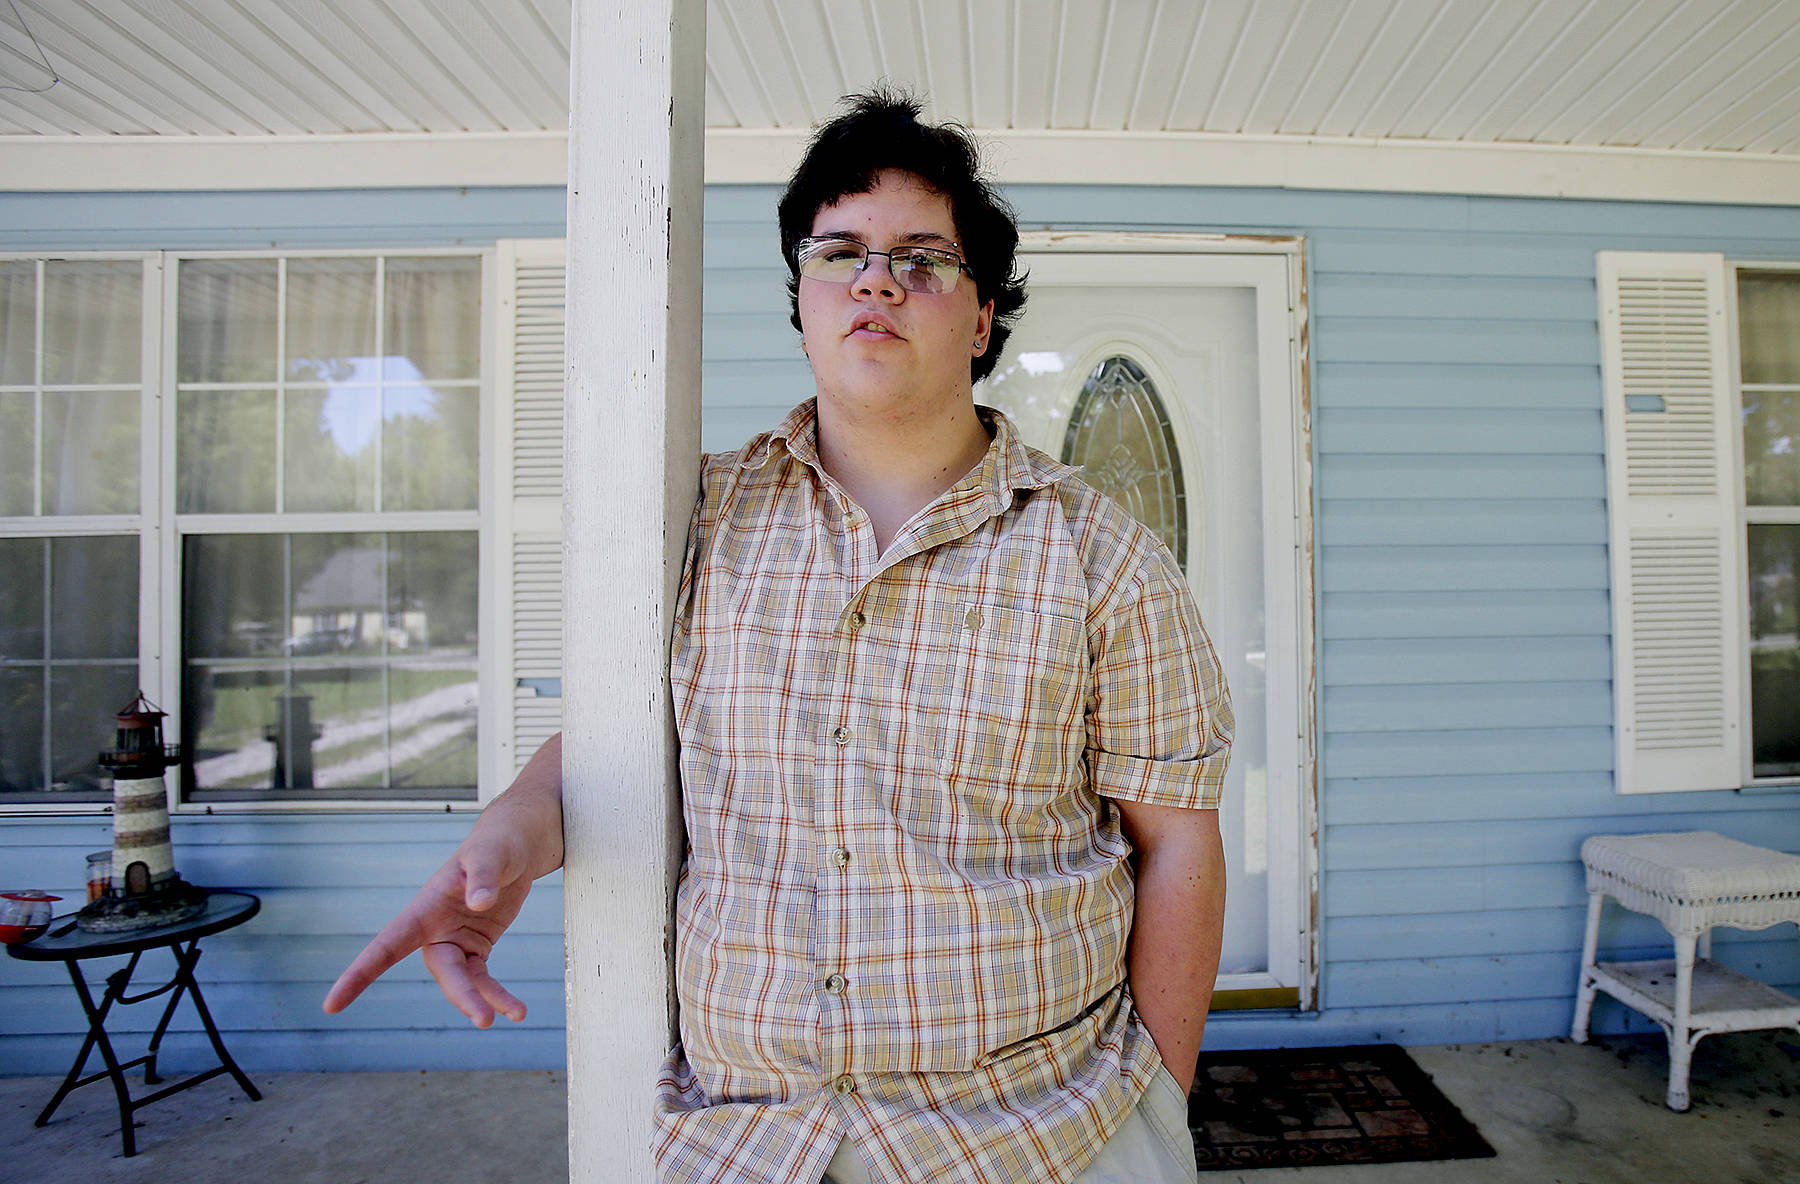 FILE - In this Aug. 22, 2016 file photo, transgender high school student Gavin Grimm poses in Gloucester, Va. The Supreme Court is returning a transgender teen’s case to a lower court without reaching a decision. The justices said Monday, March 6, 2017, they have opted not to decide whether federal anti-discrimination law gives high school senior Gavin Grimm the right to use the boys’ bathroom in his Virginia school. (AP Photo/Steve Helber, File)